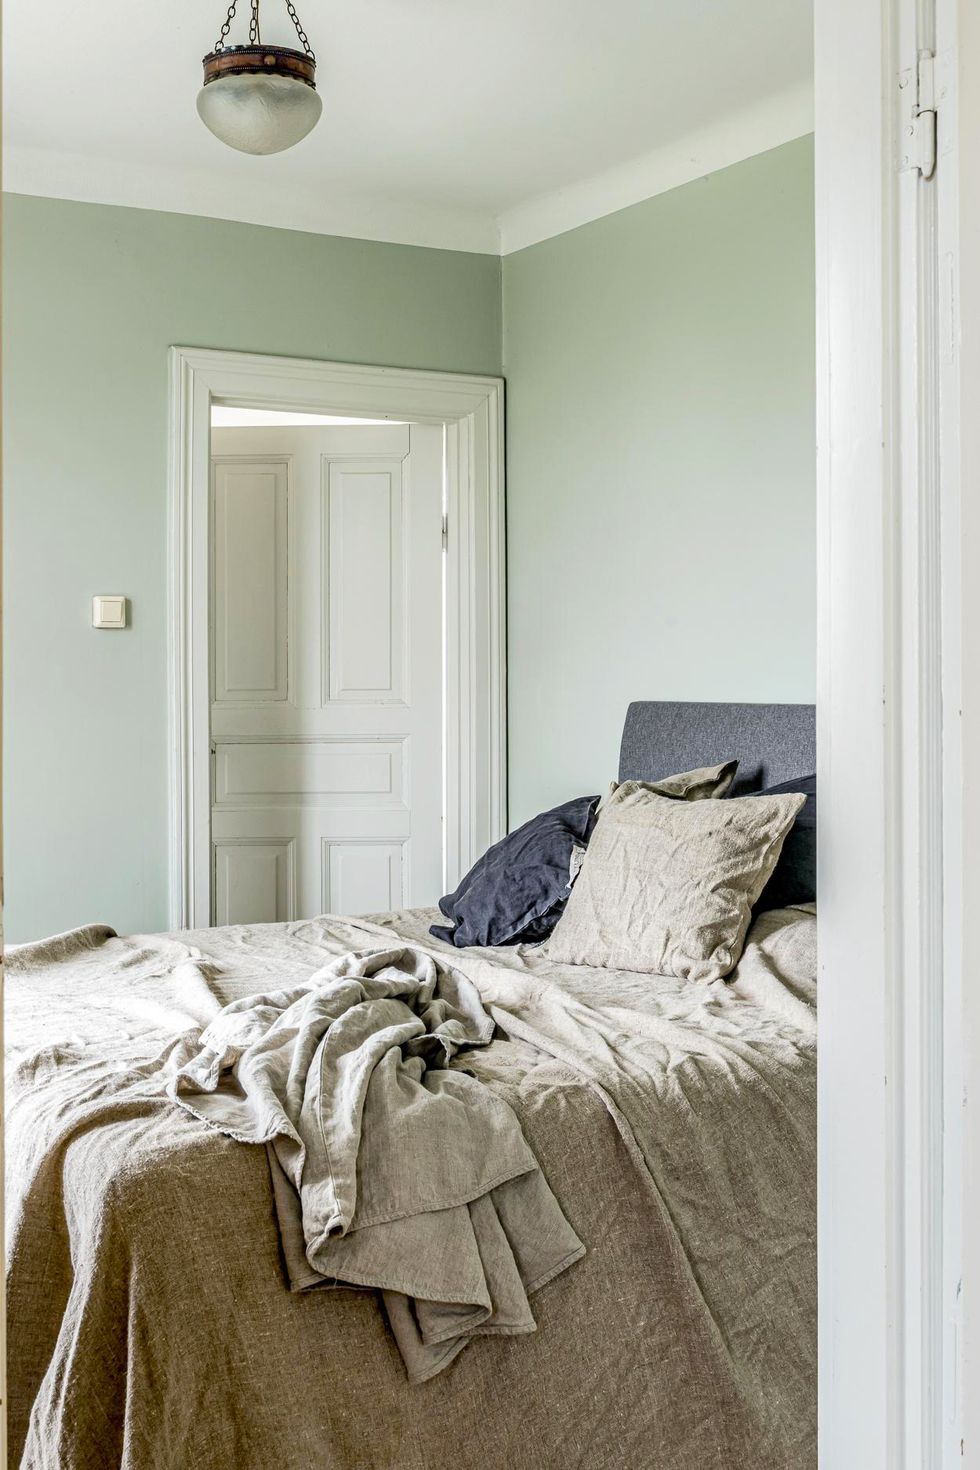 The 10 Best Green Paint Colors to Brighten up Your House